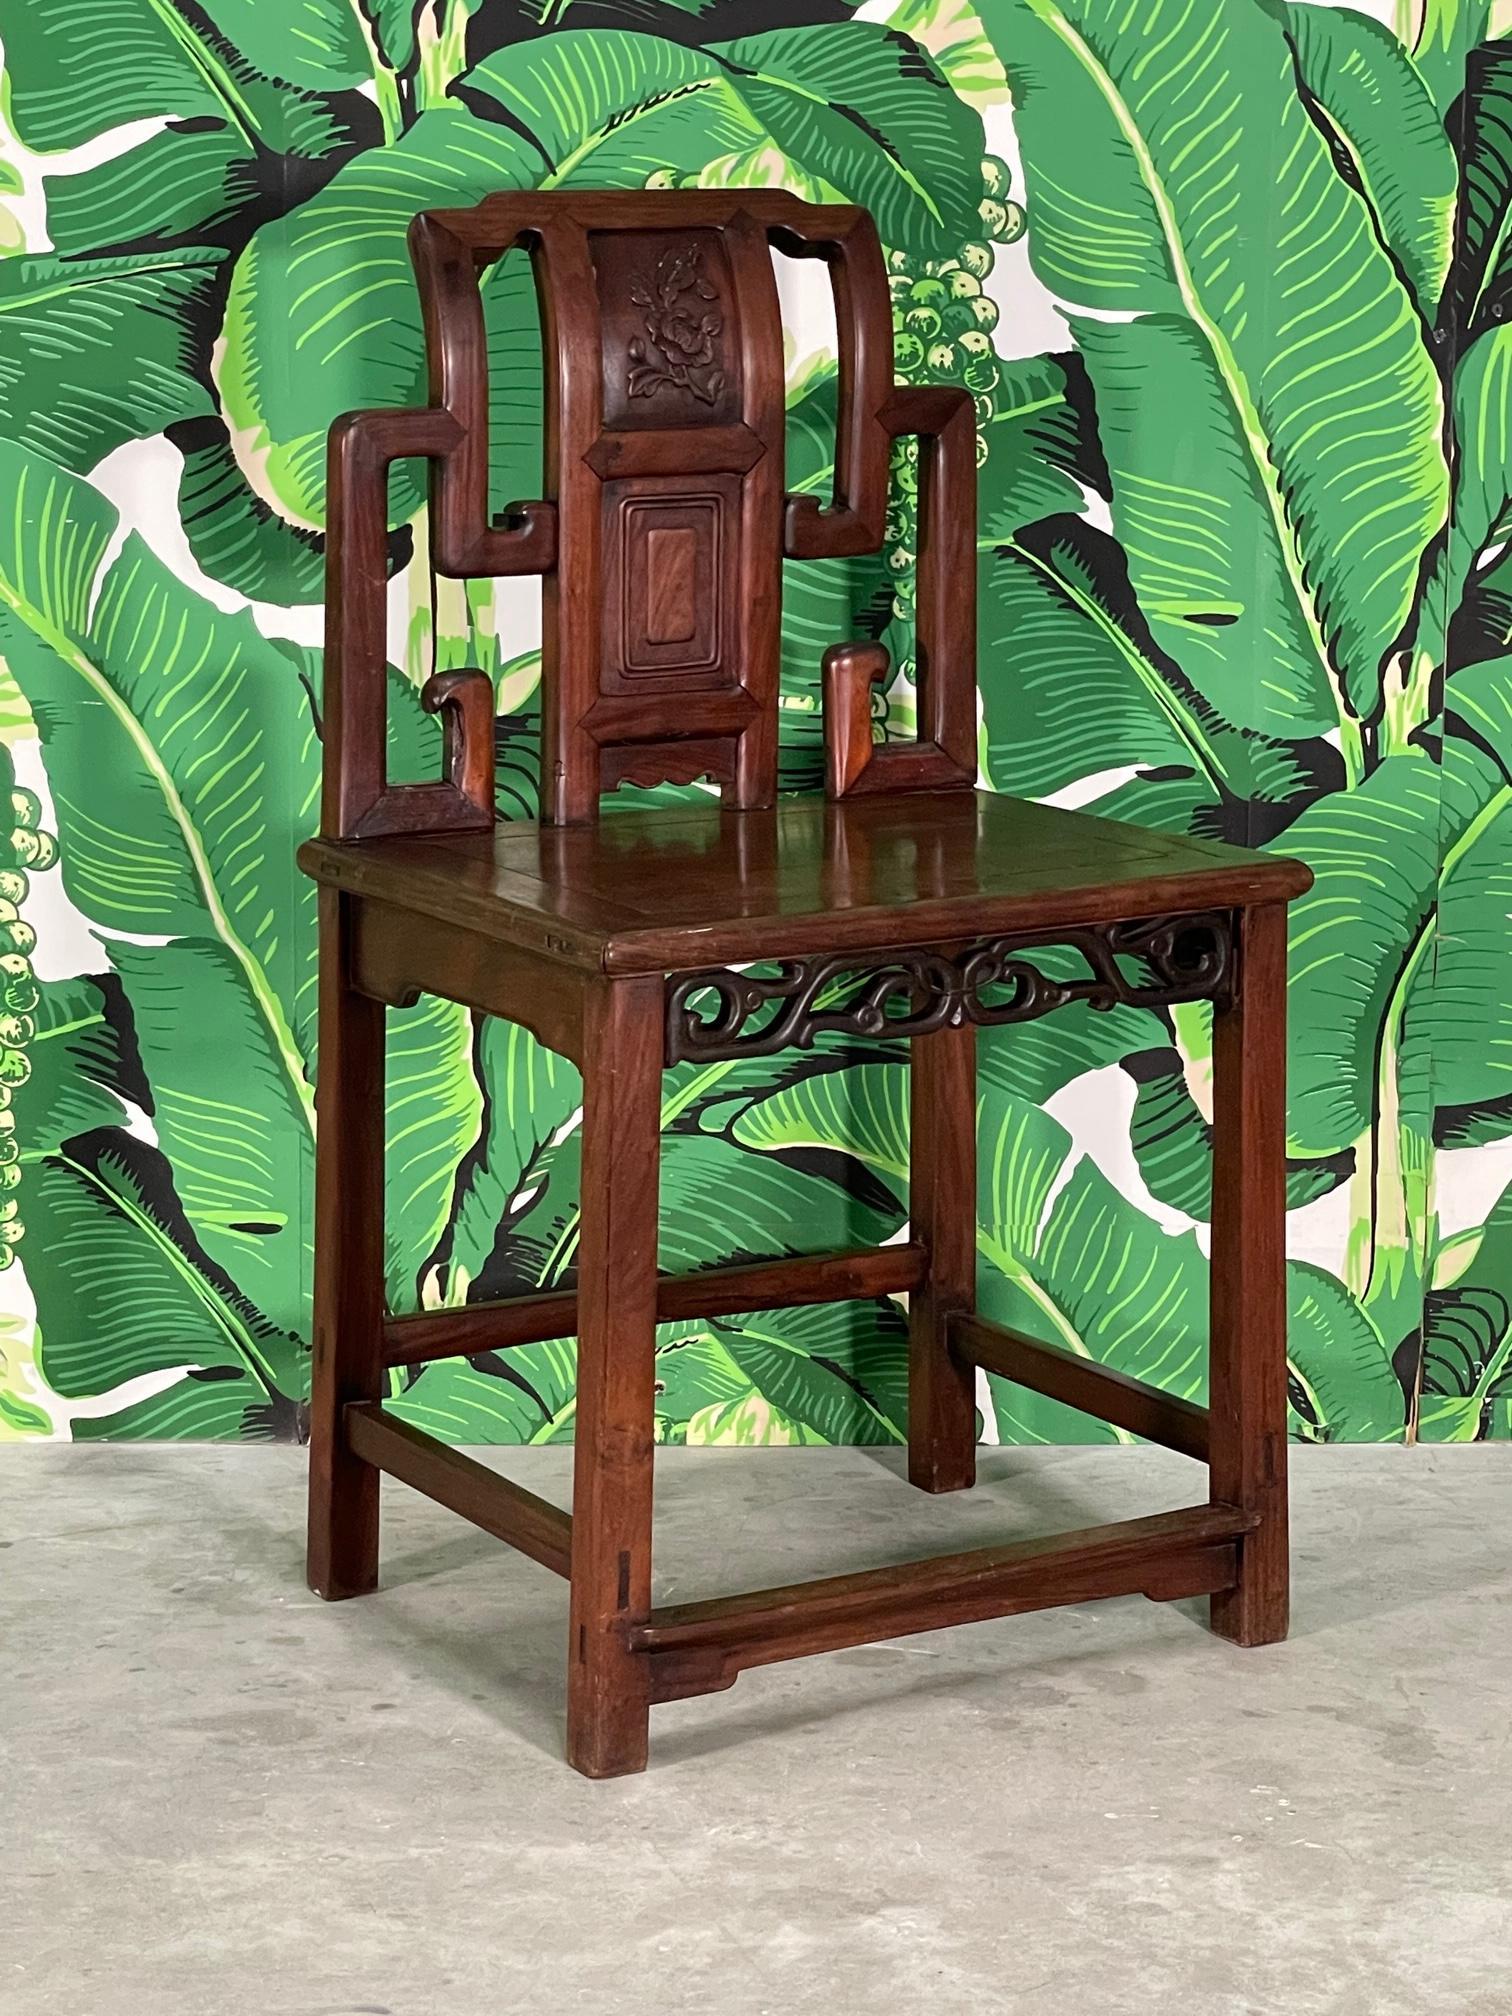 Early 19th century Asian scribe's chair features hand carved skirt and back detailing, and mortised joints. Rare example of artisan craftsmanship that has been well preserved. Good condition with imperfections consistent with age (see photos). 
For